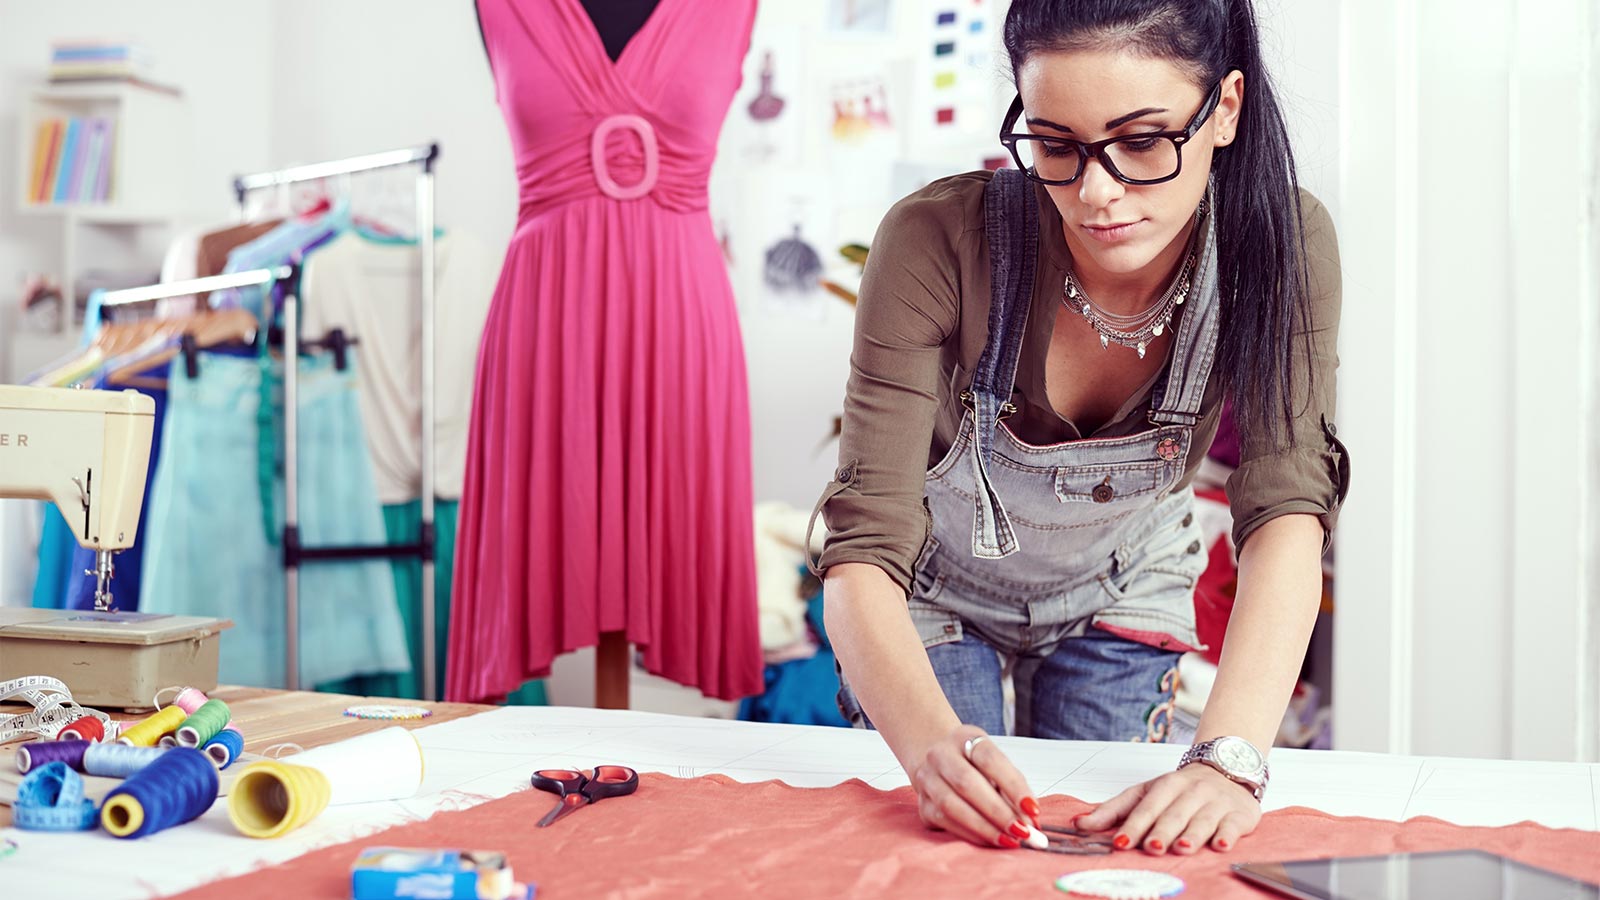 What are the different roles available in the fashion industry?